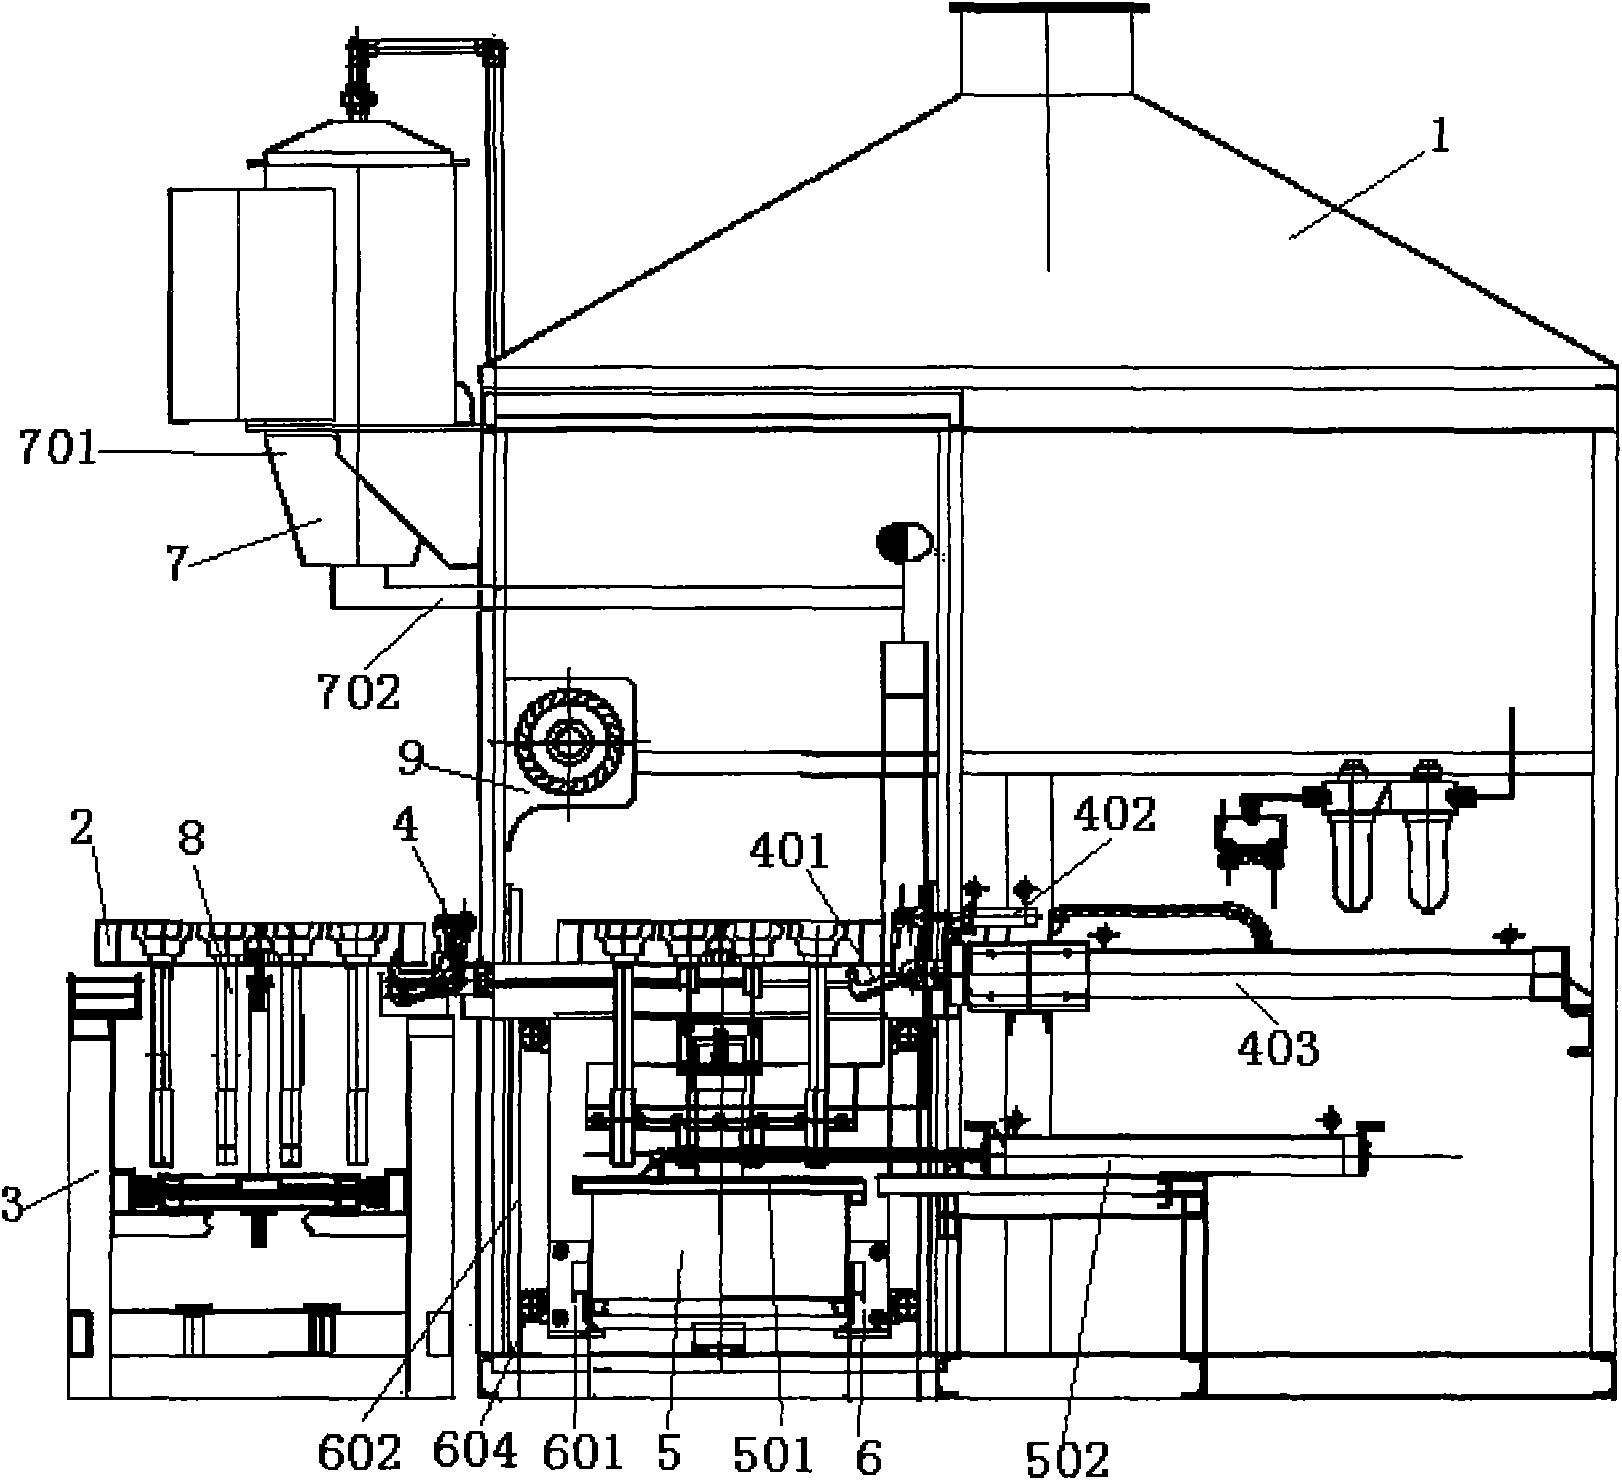 Automatic primer dipping and coating mechanism for plastic-coated spline shaft without sagging